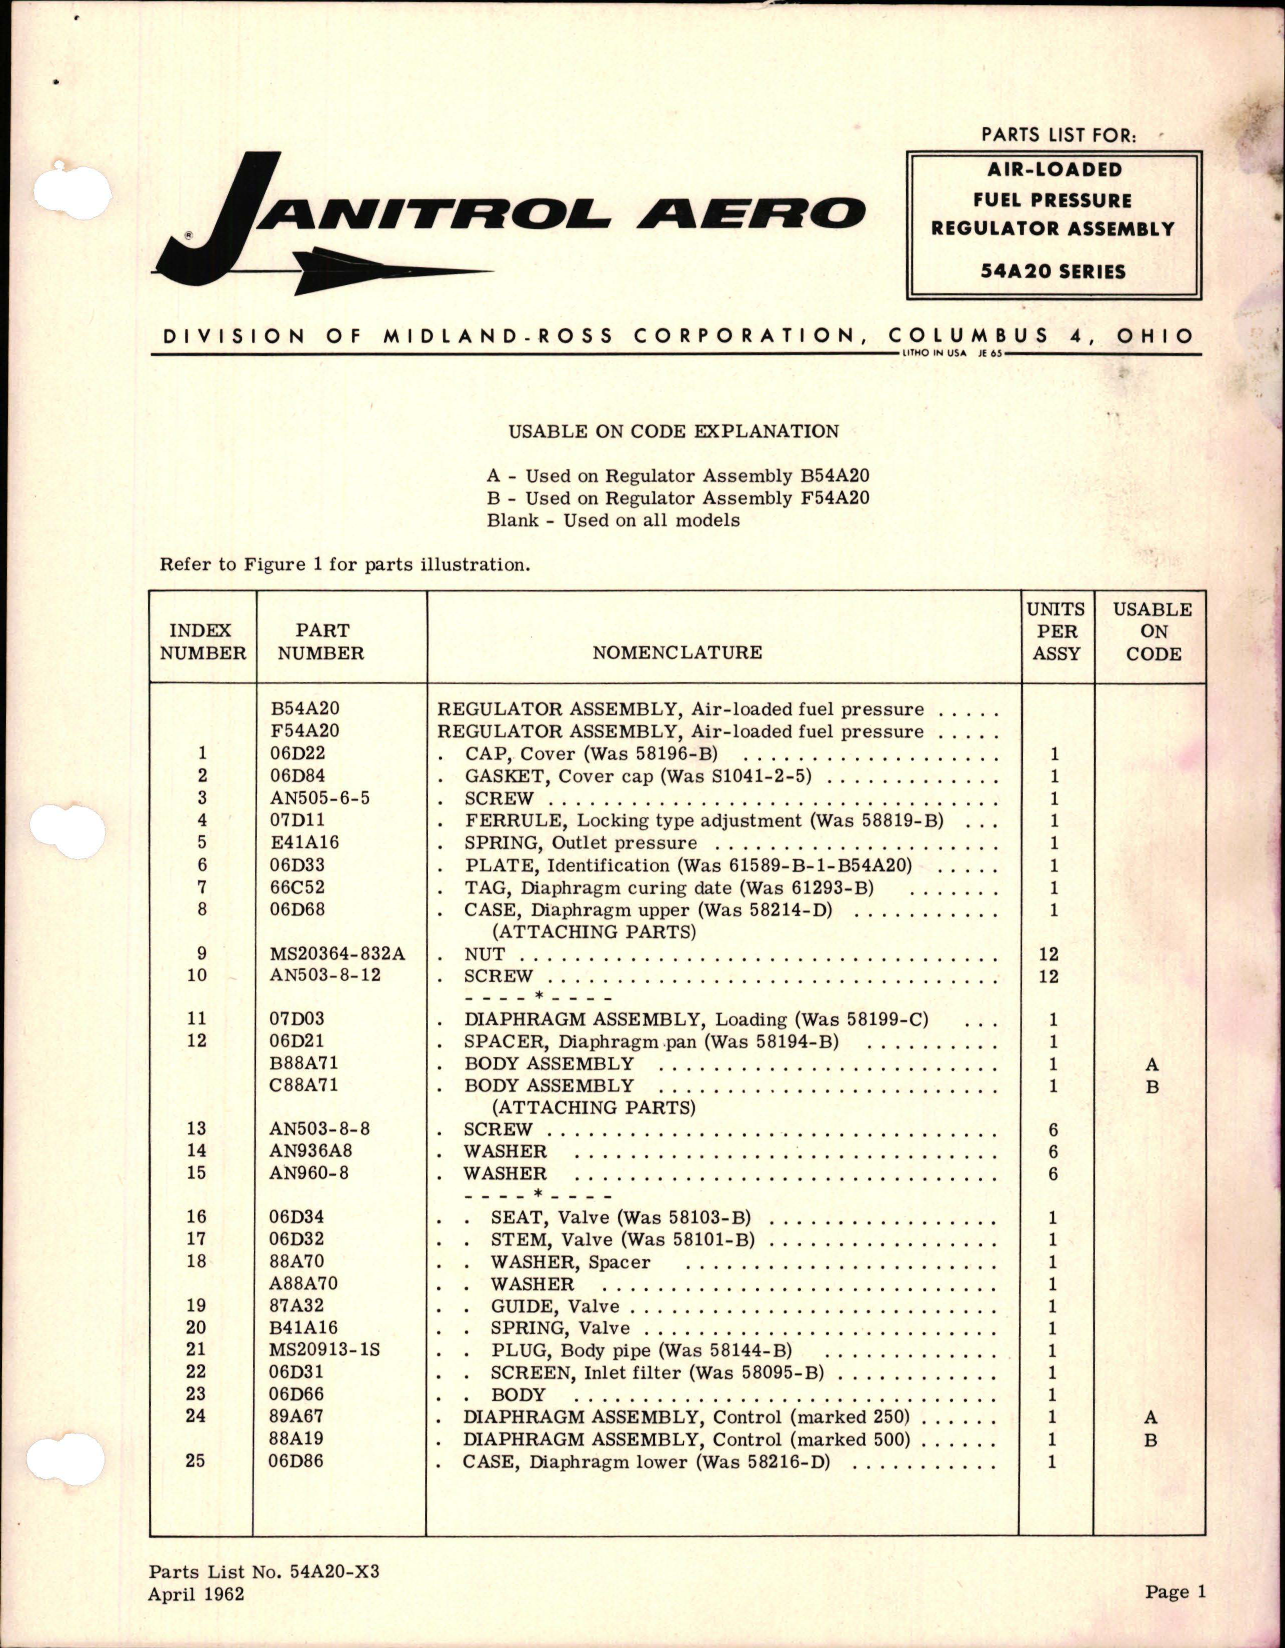 Sample page 1 from AirCorps Library document: Parts List for Air-Loaded Fuel Pressure Regulator Assembly - 54A20 Series